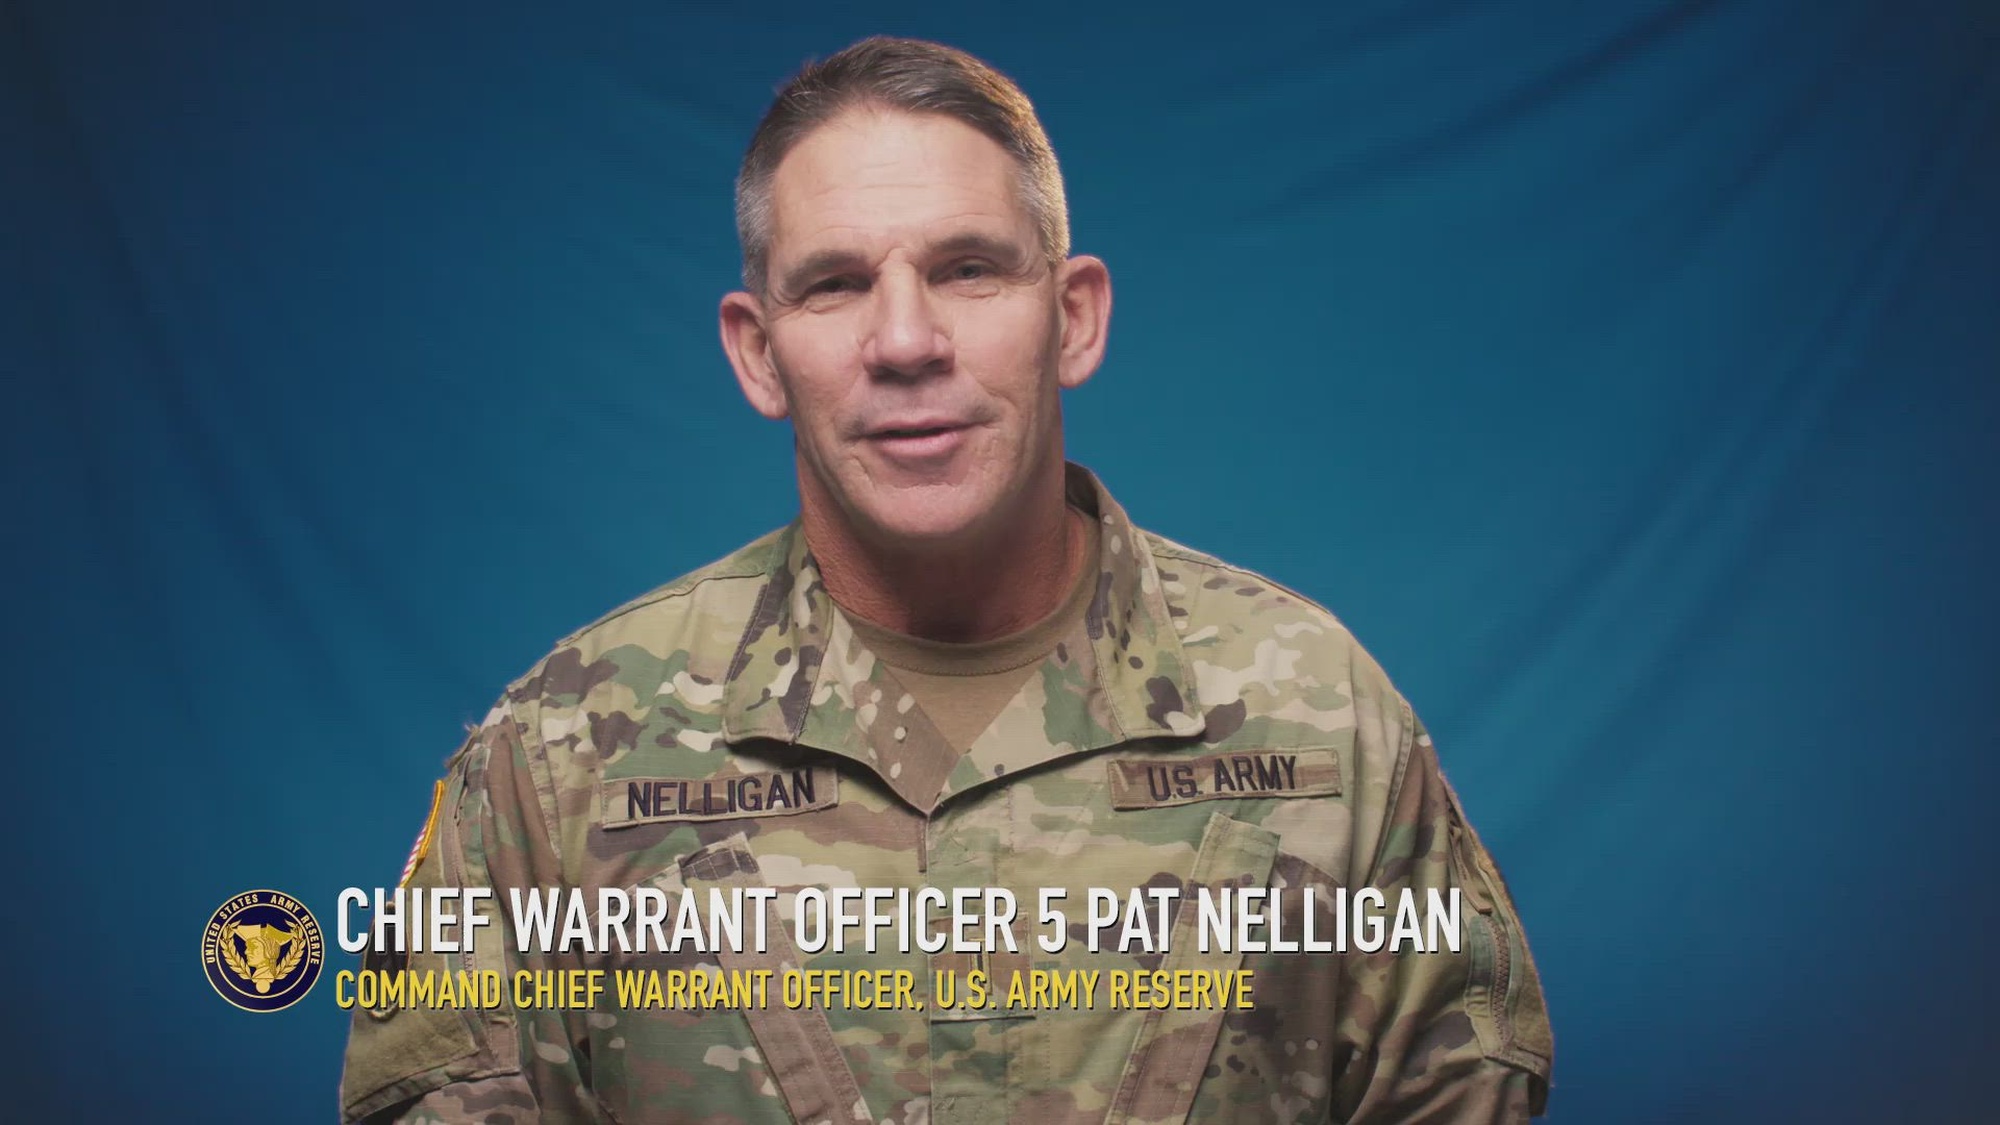 Chief Warrant Officer 5 Nelligan discusses IPPS-A